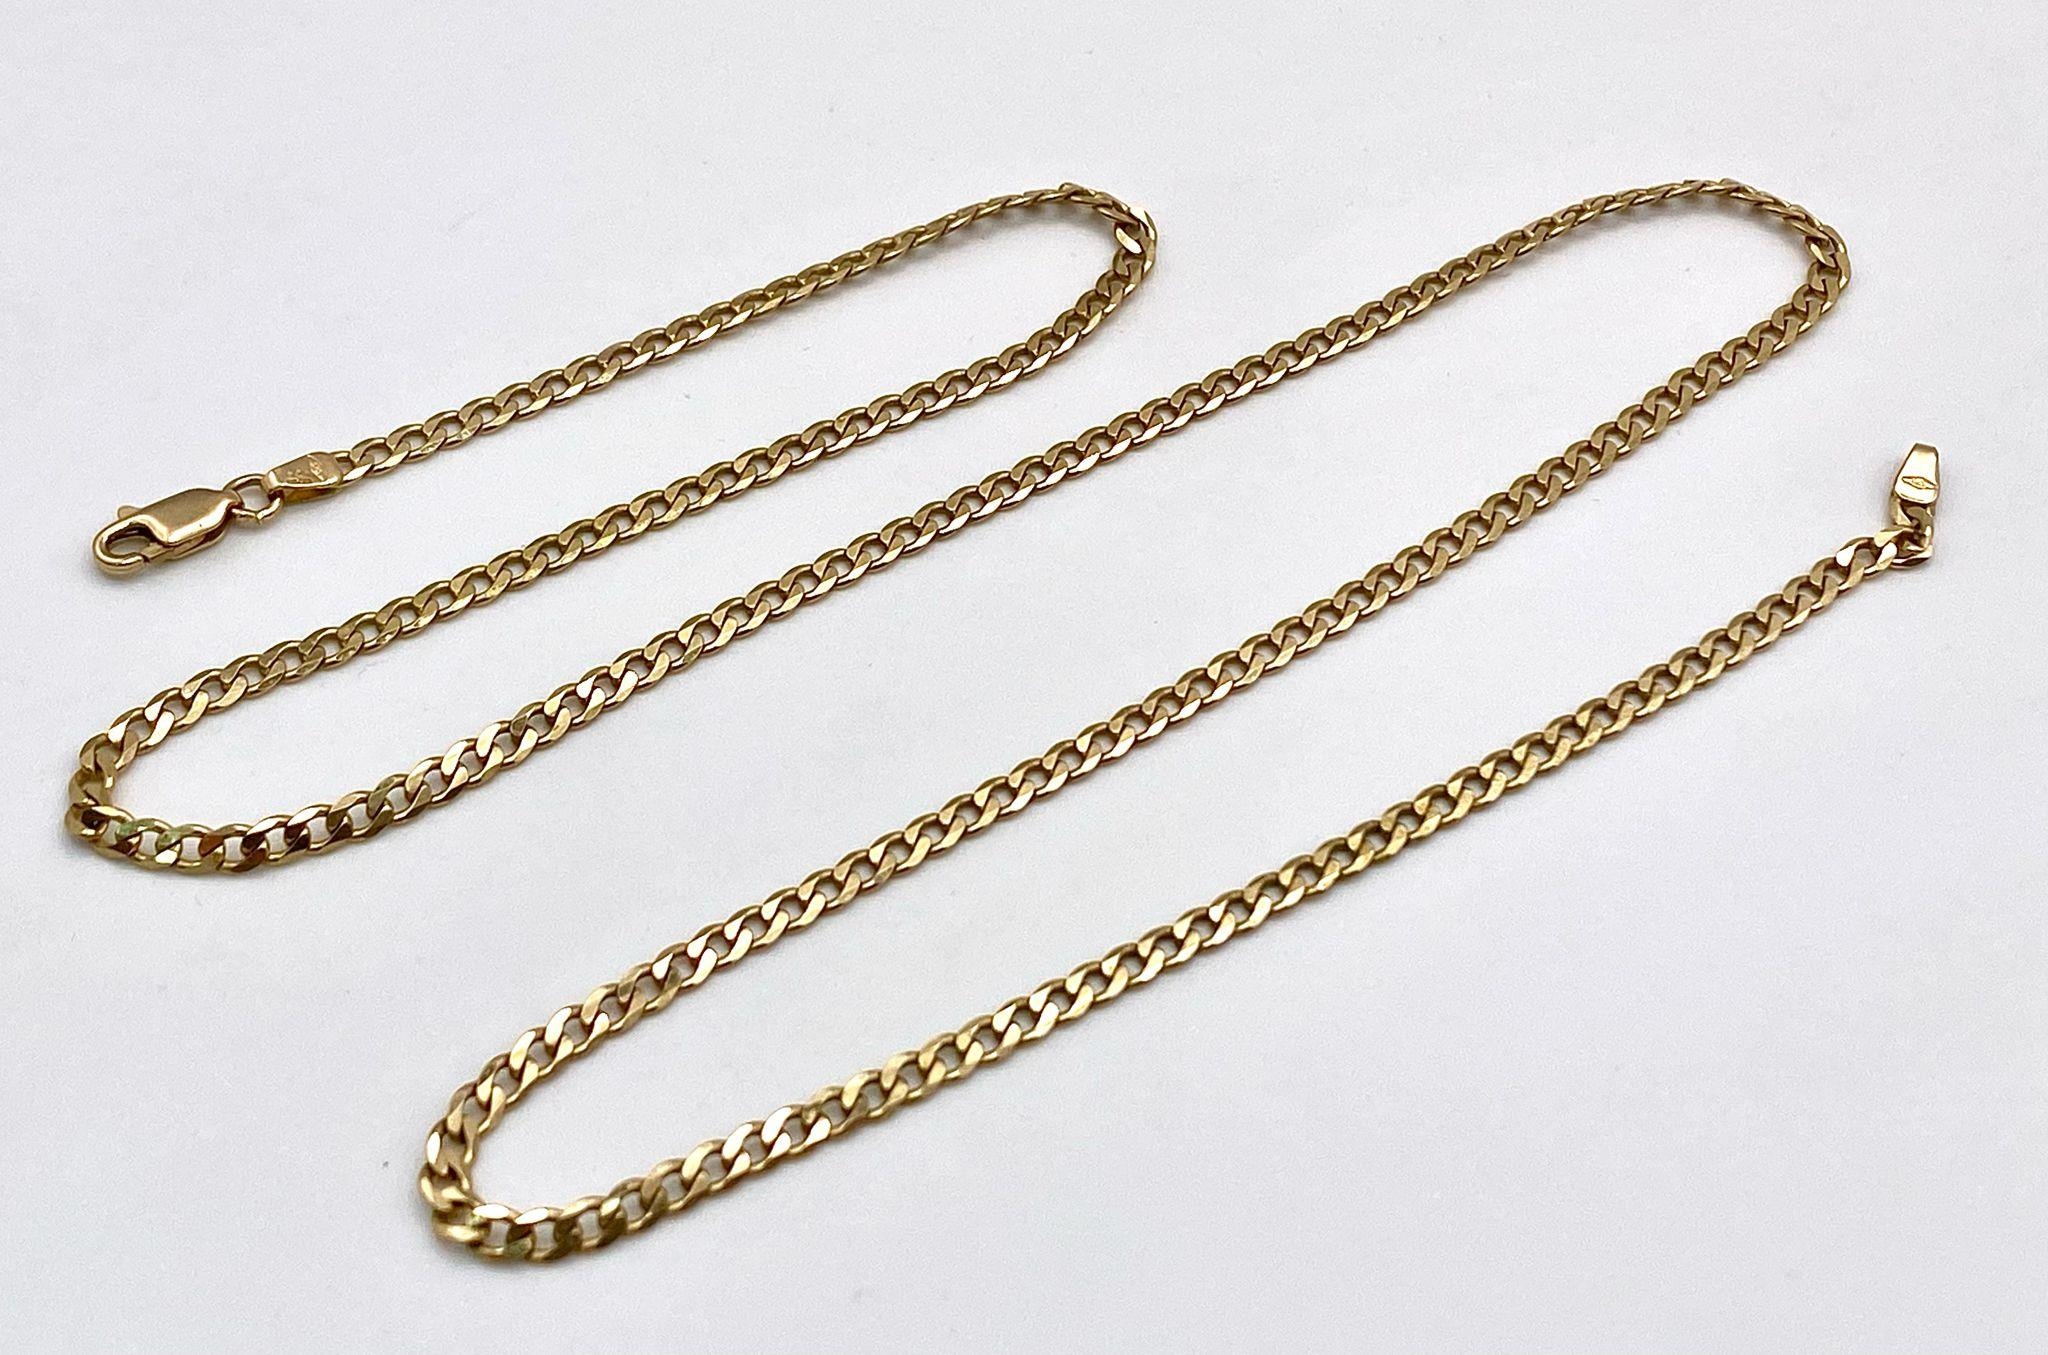 A 9K Yellow Gold Flat Curb Link Chain/Necklace. 54cm length. 8.5g weight. - Image 2 of 5